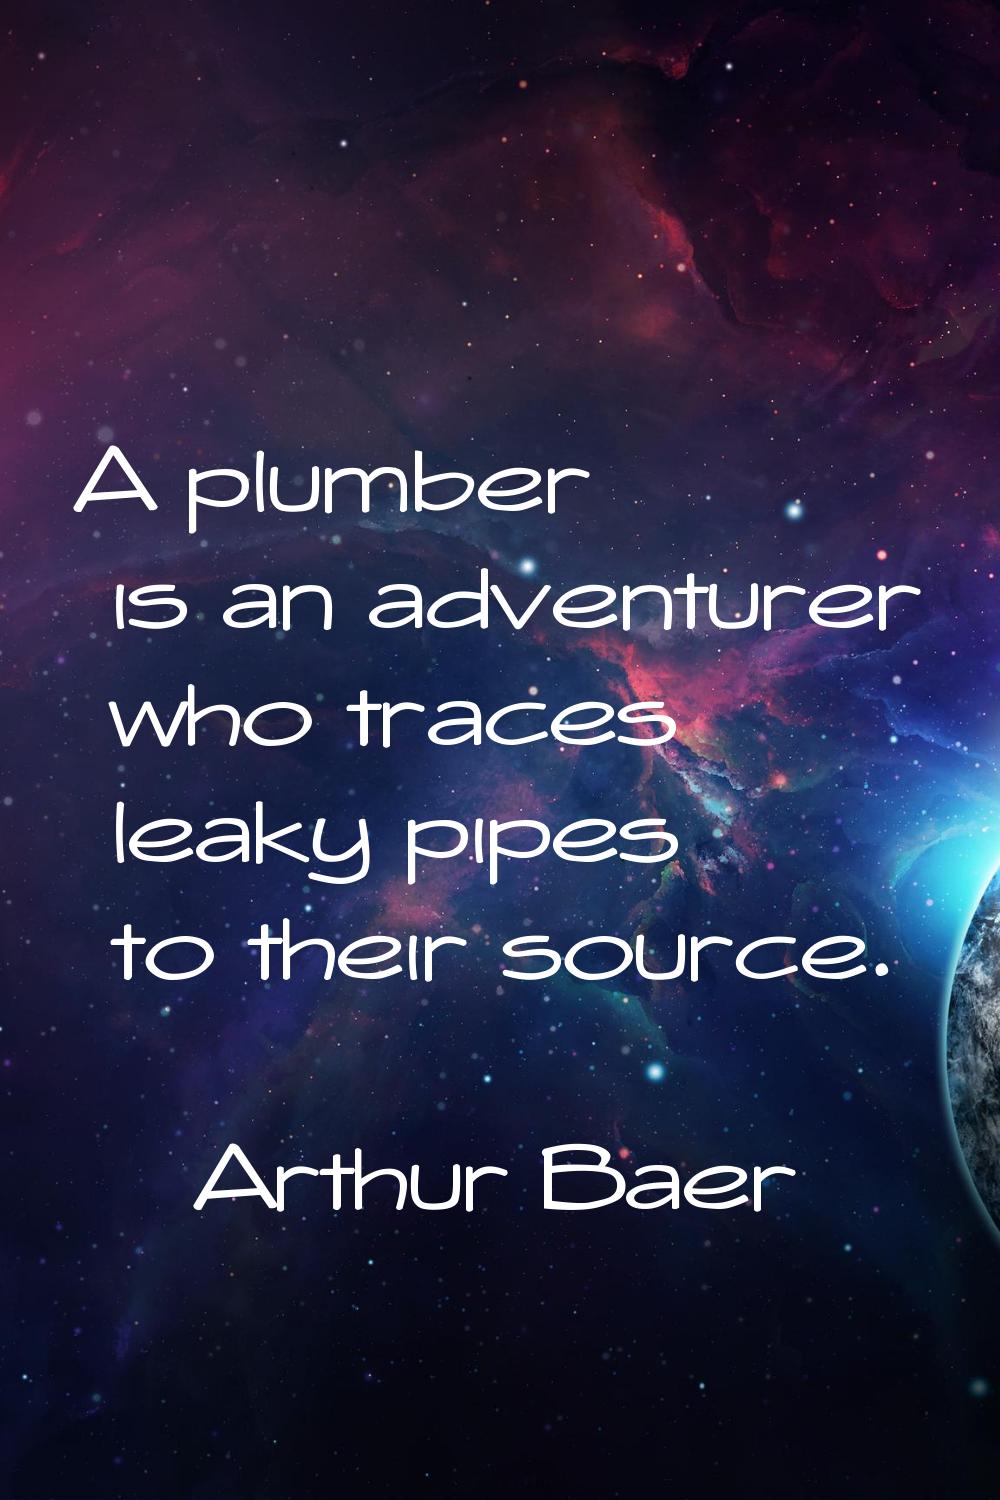 A plumber is an adventurer who traces leaky pipes to their source.